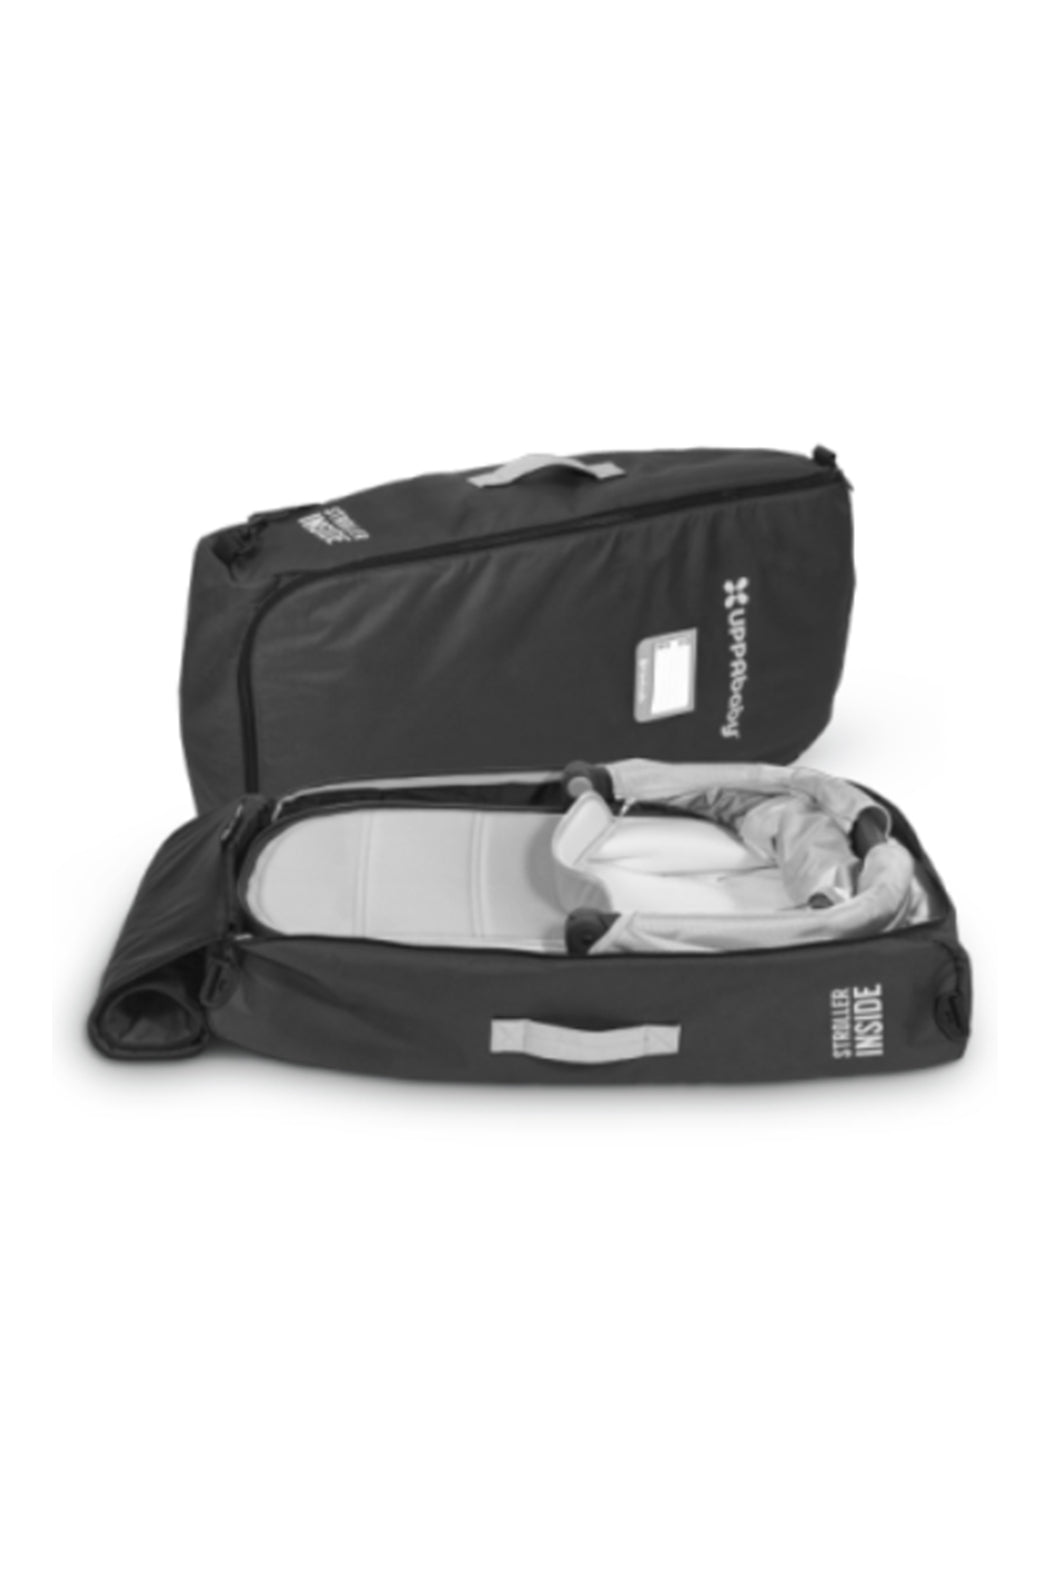 UPPAbaby Travel Bag For RumbleSeat/Bassinet